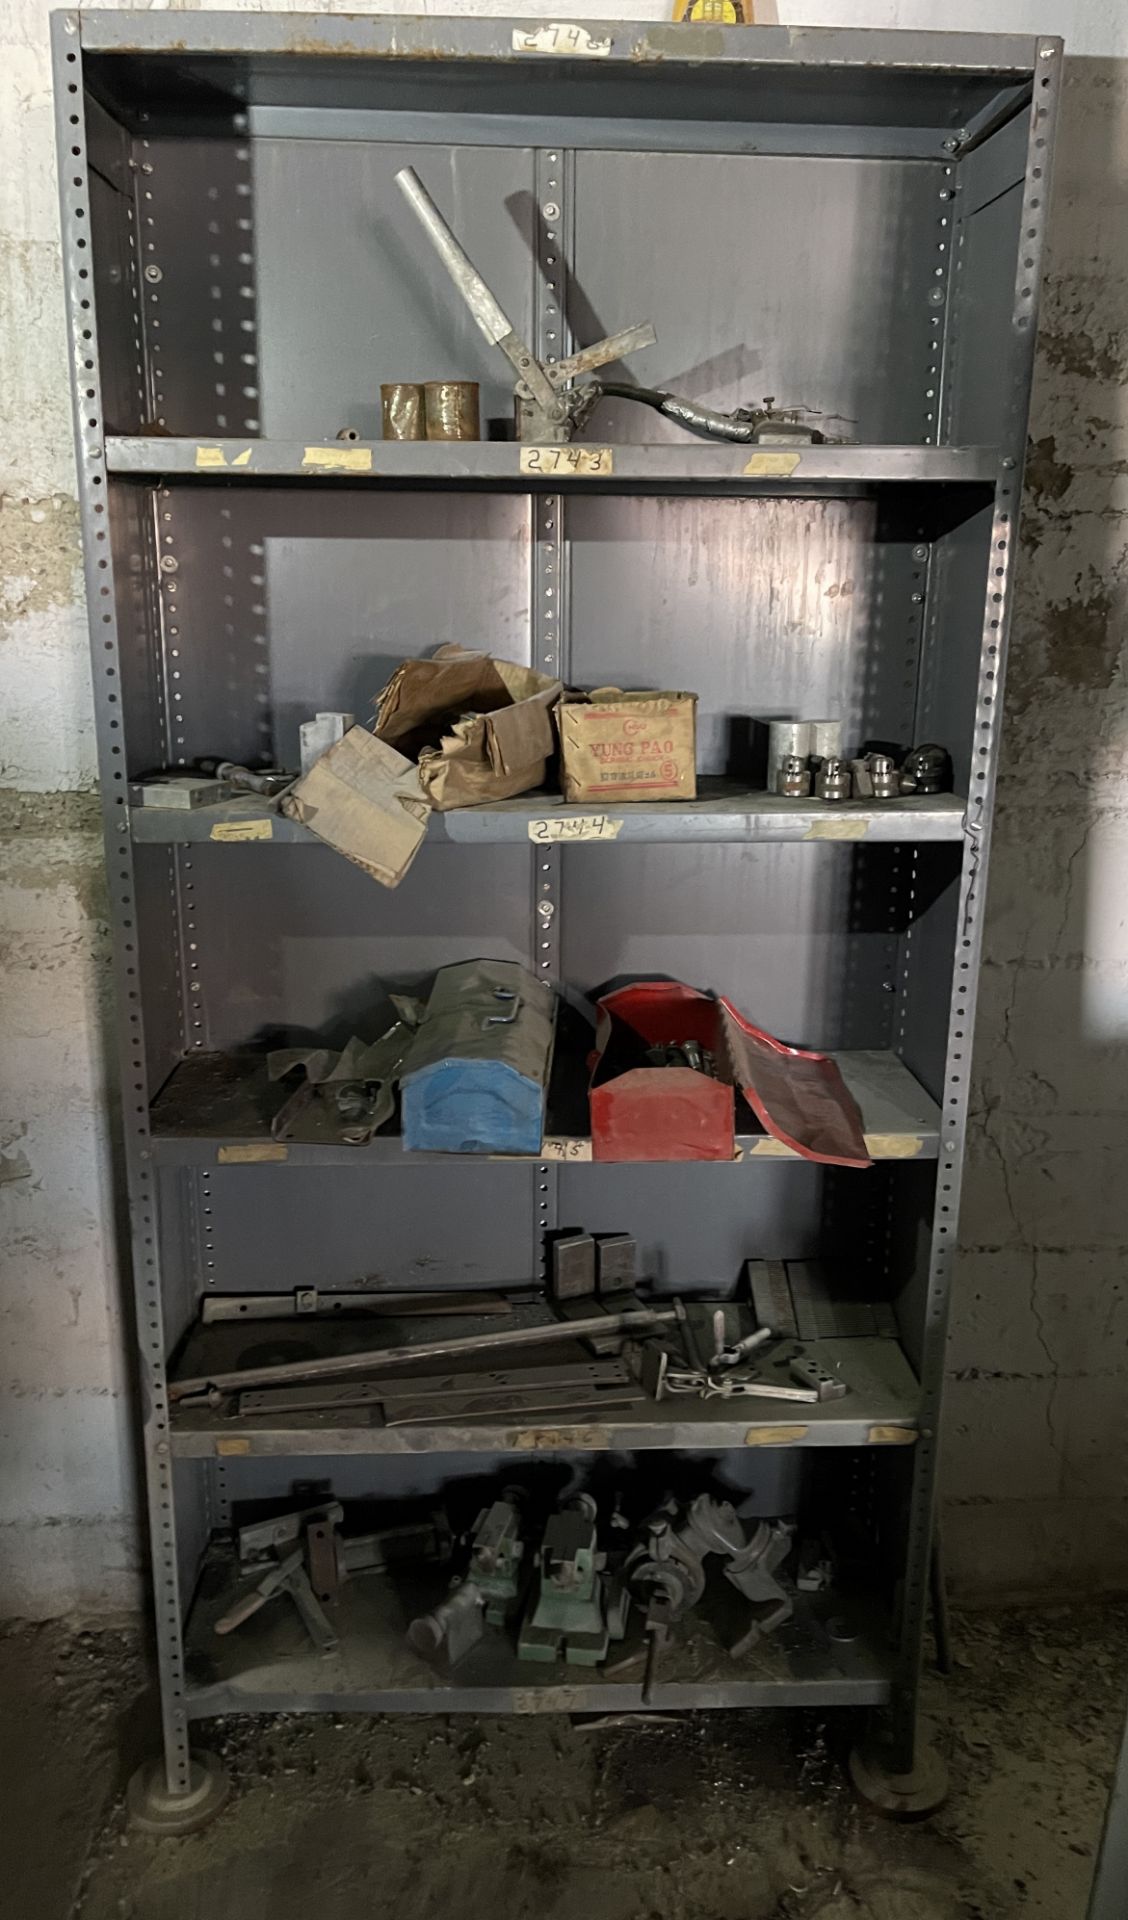 ENTIRE CONTENTS OF SHELF INCLUDING UNIT / TOOLING FOR DRILL PRESSES